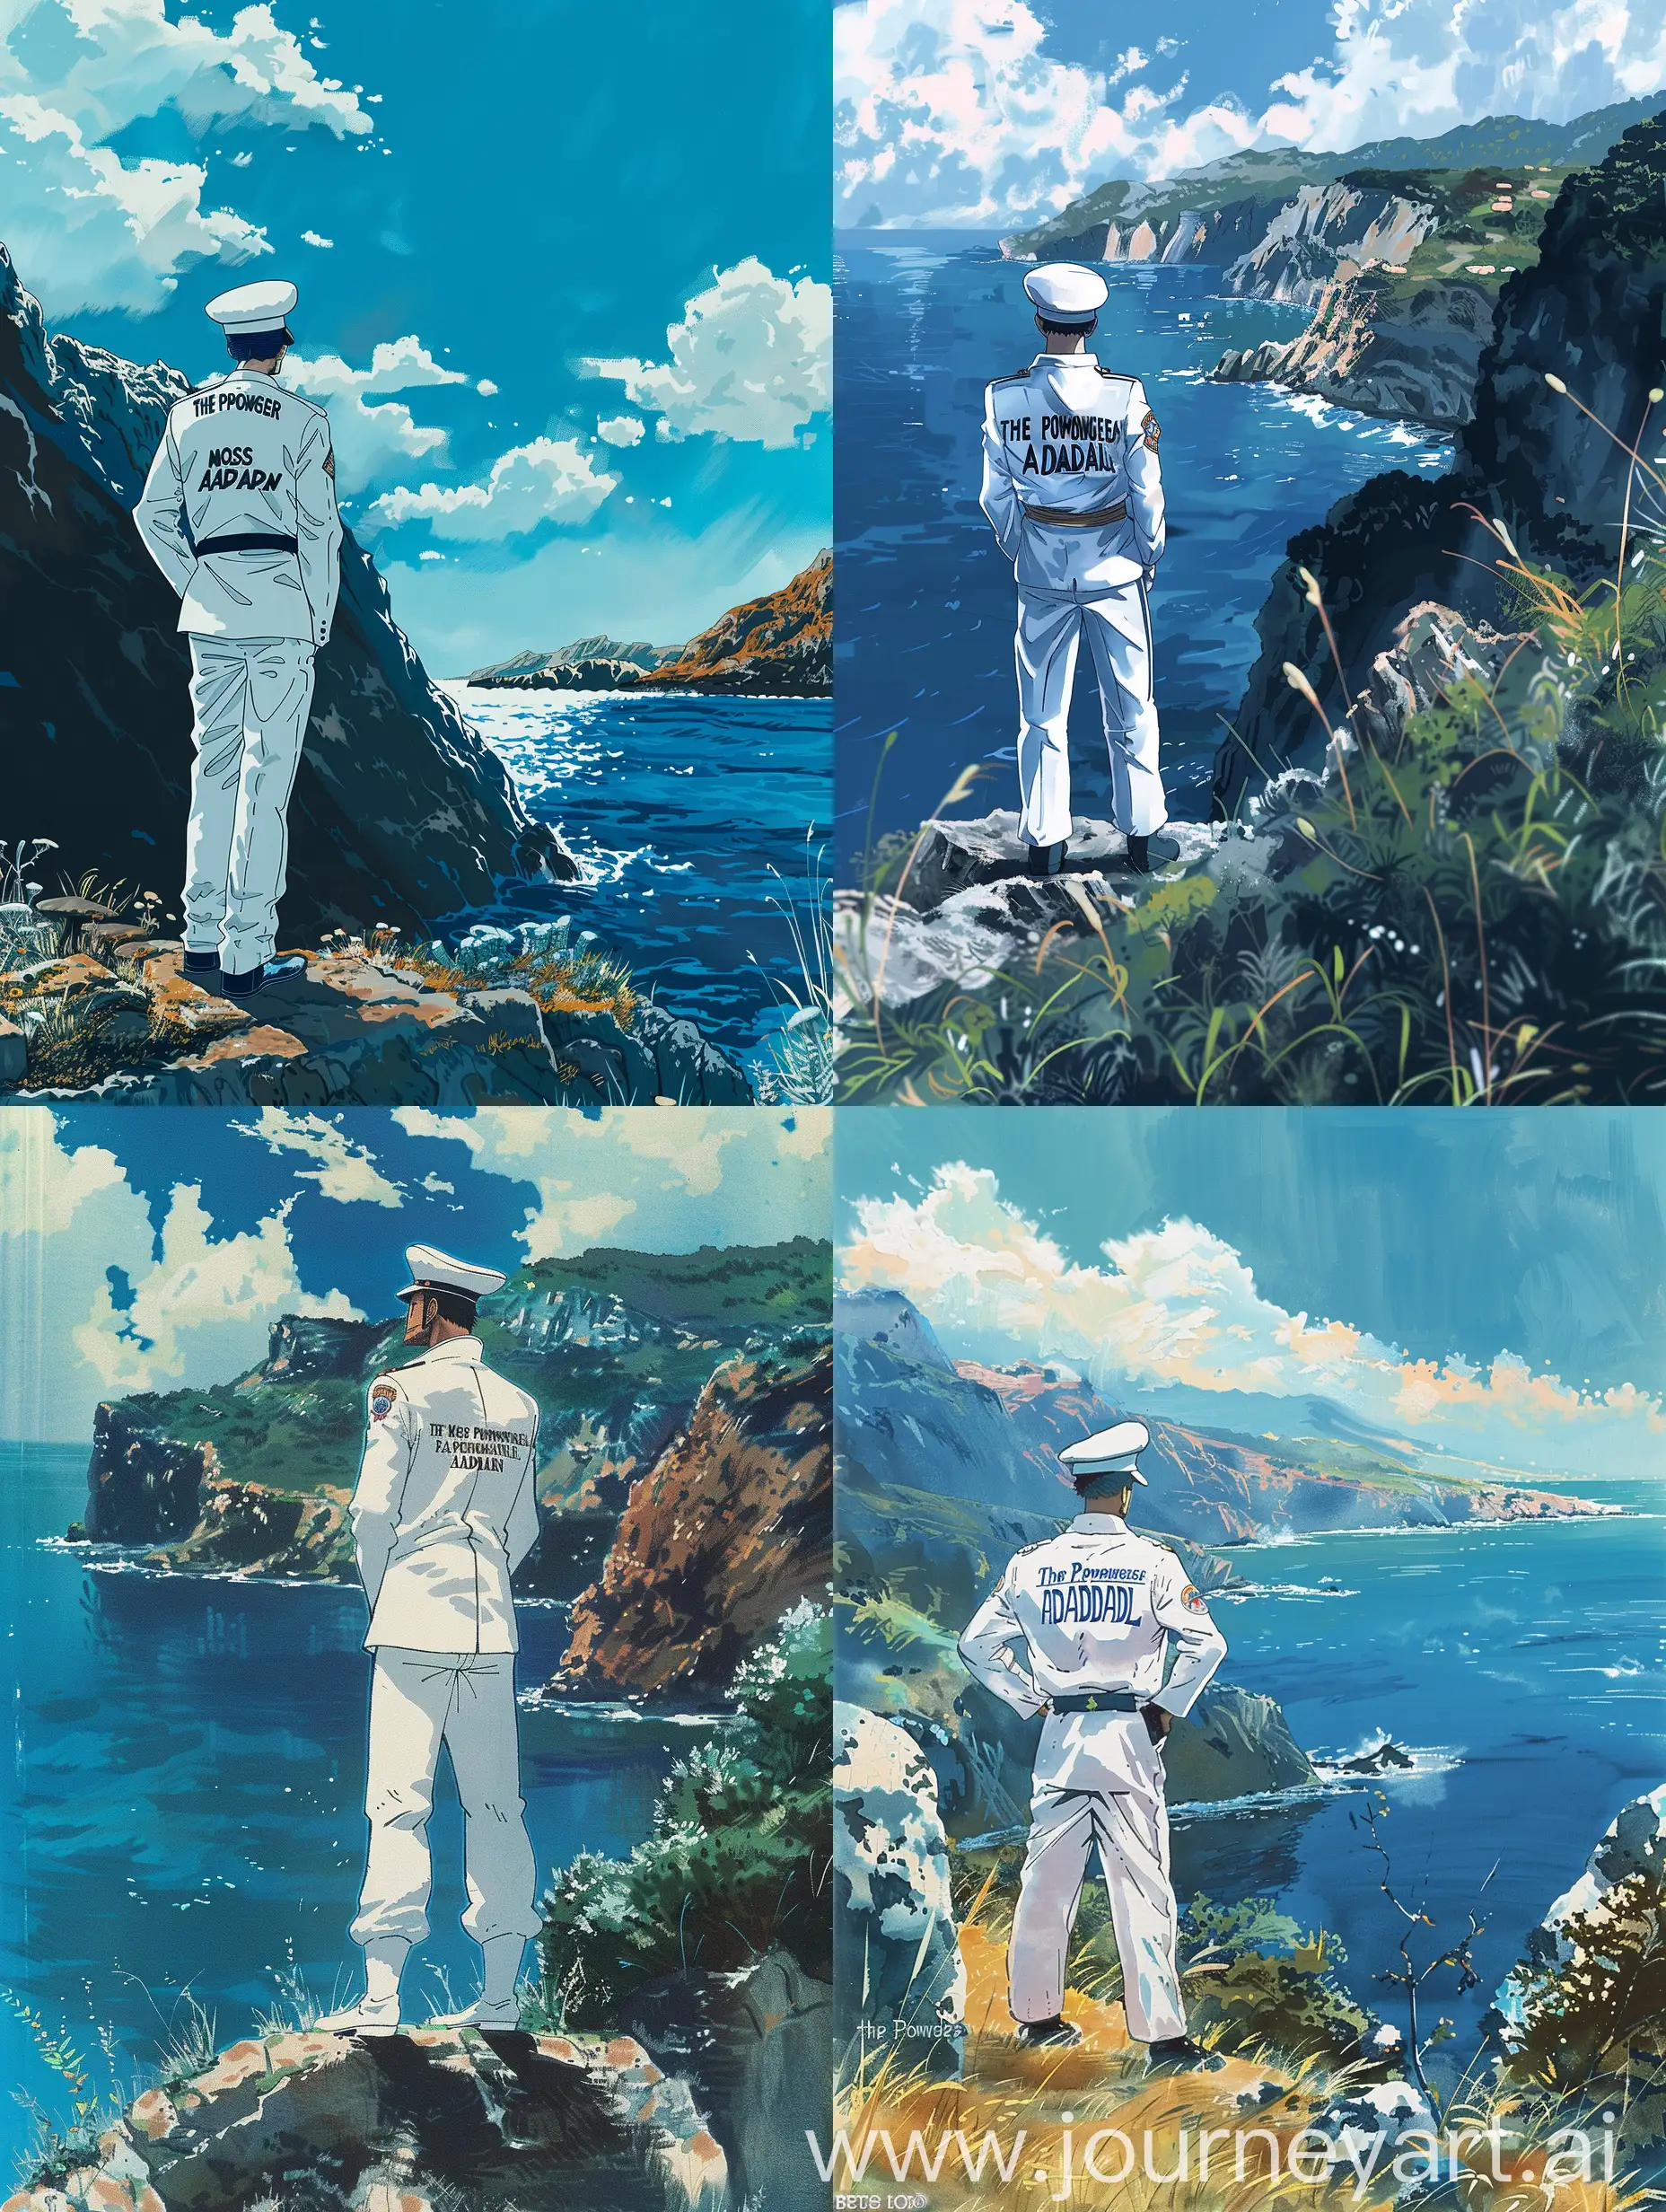 A marine soldier from the anime One Piece appeared, standing on the edge of a mountain hill in front of the sea.  He wears a white navy uniform, with "The Most Powerful Admiral" written on his back. Anime style, book cover